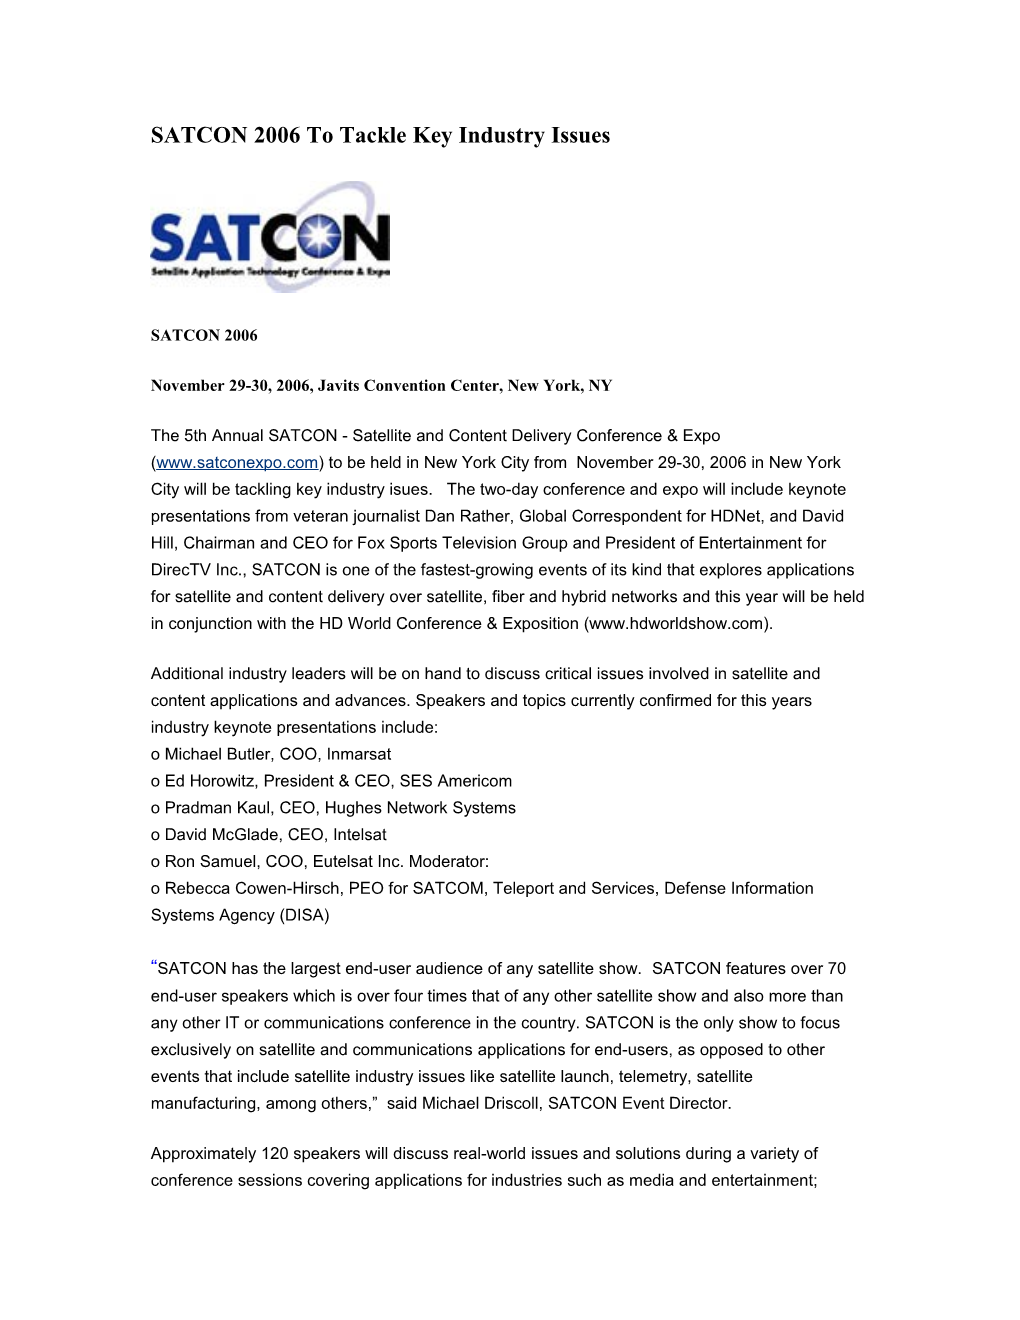 SATCON 2006 to Tackle Key Industry Issues